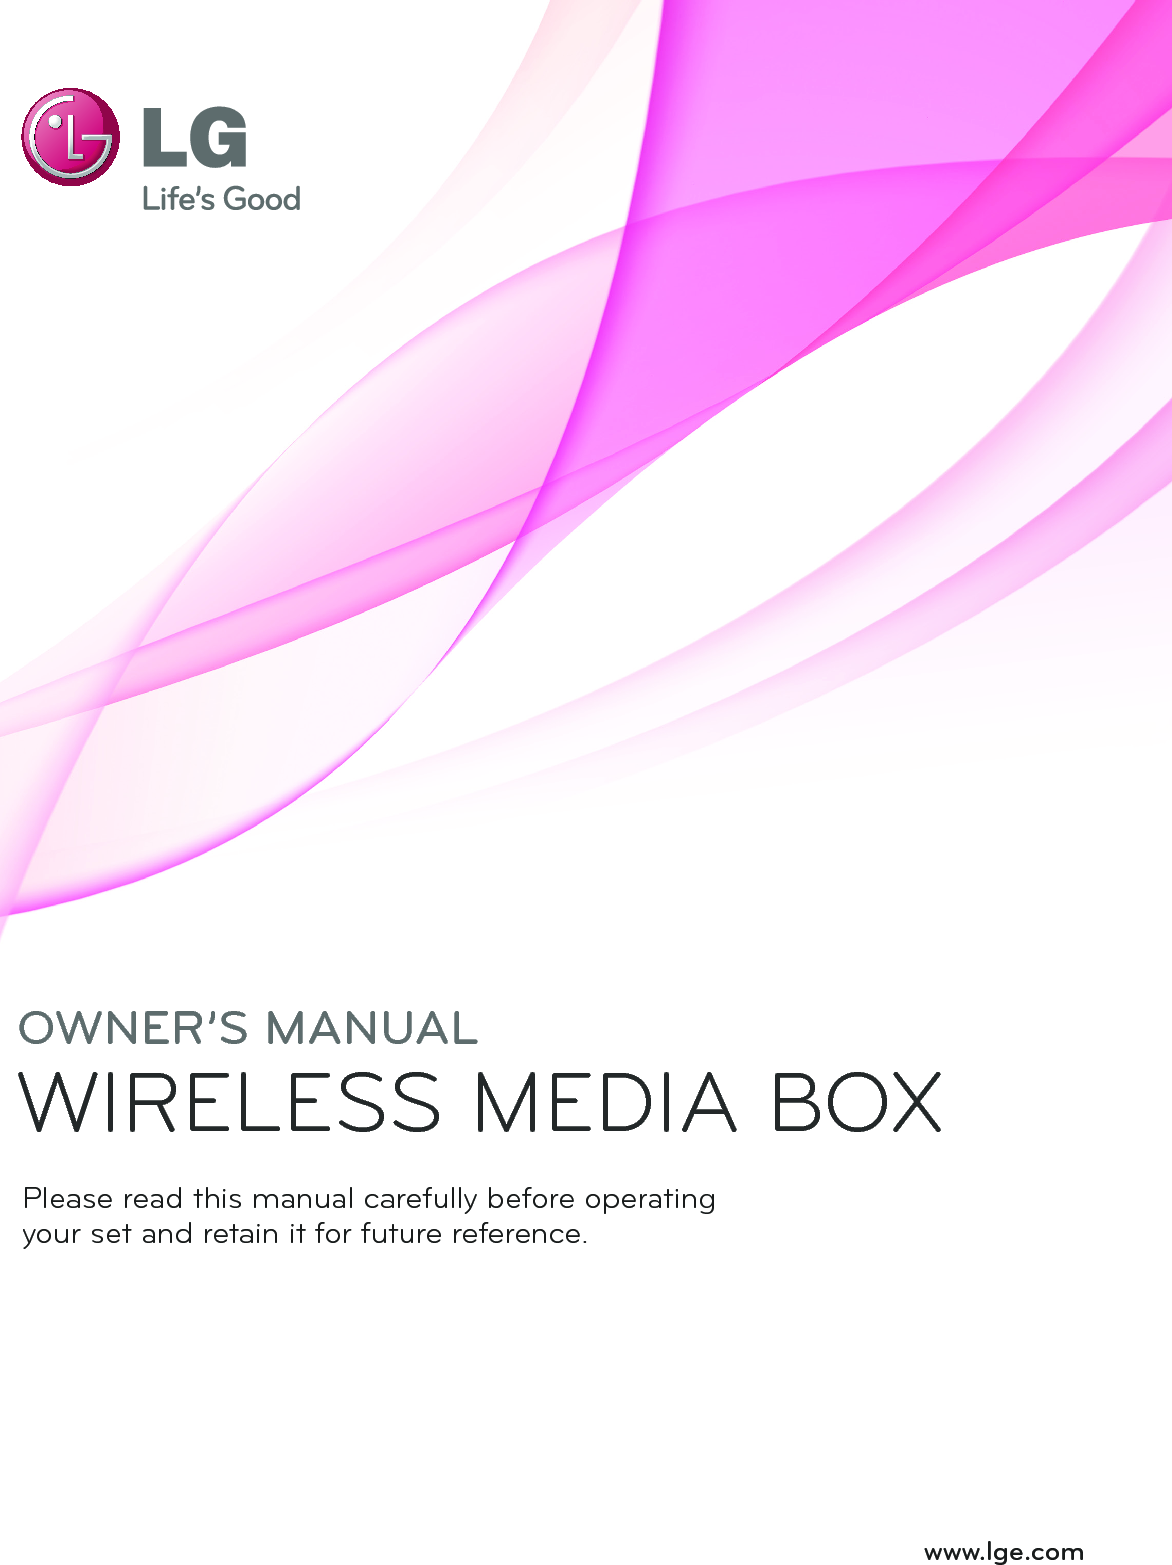 www.lge.comOWNER’S MANUALWIRELESS MEDIA BOXPlease read this manual carefully before operatingyour set and retain it for future reference.